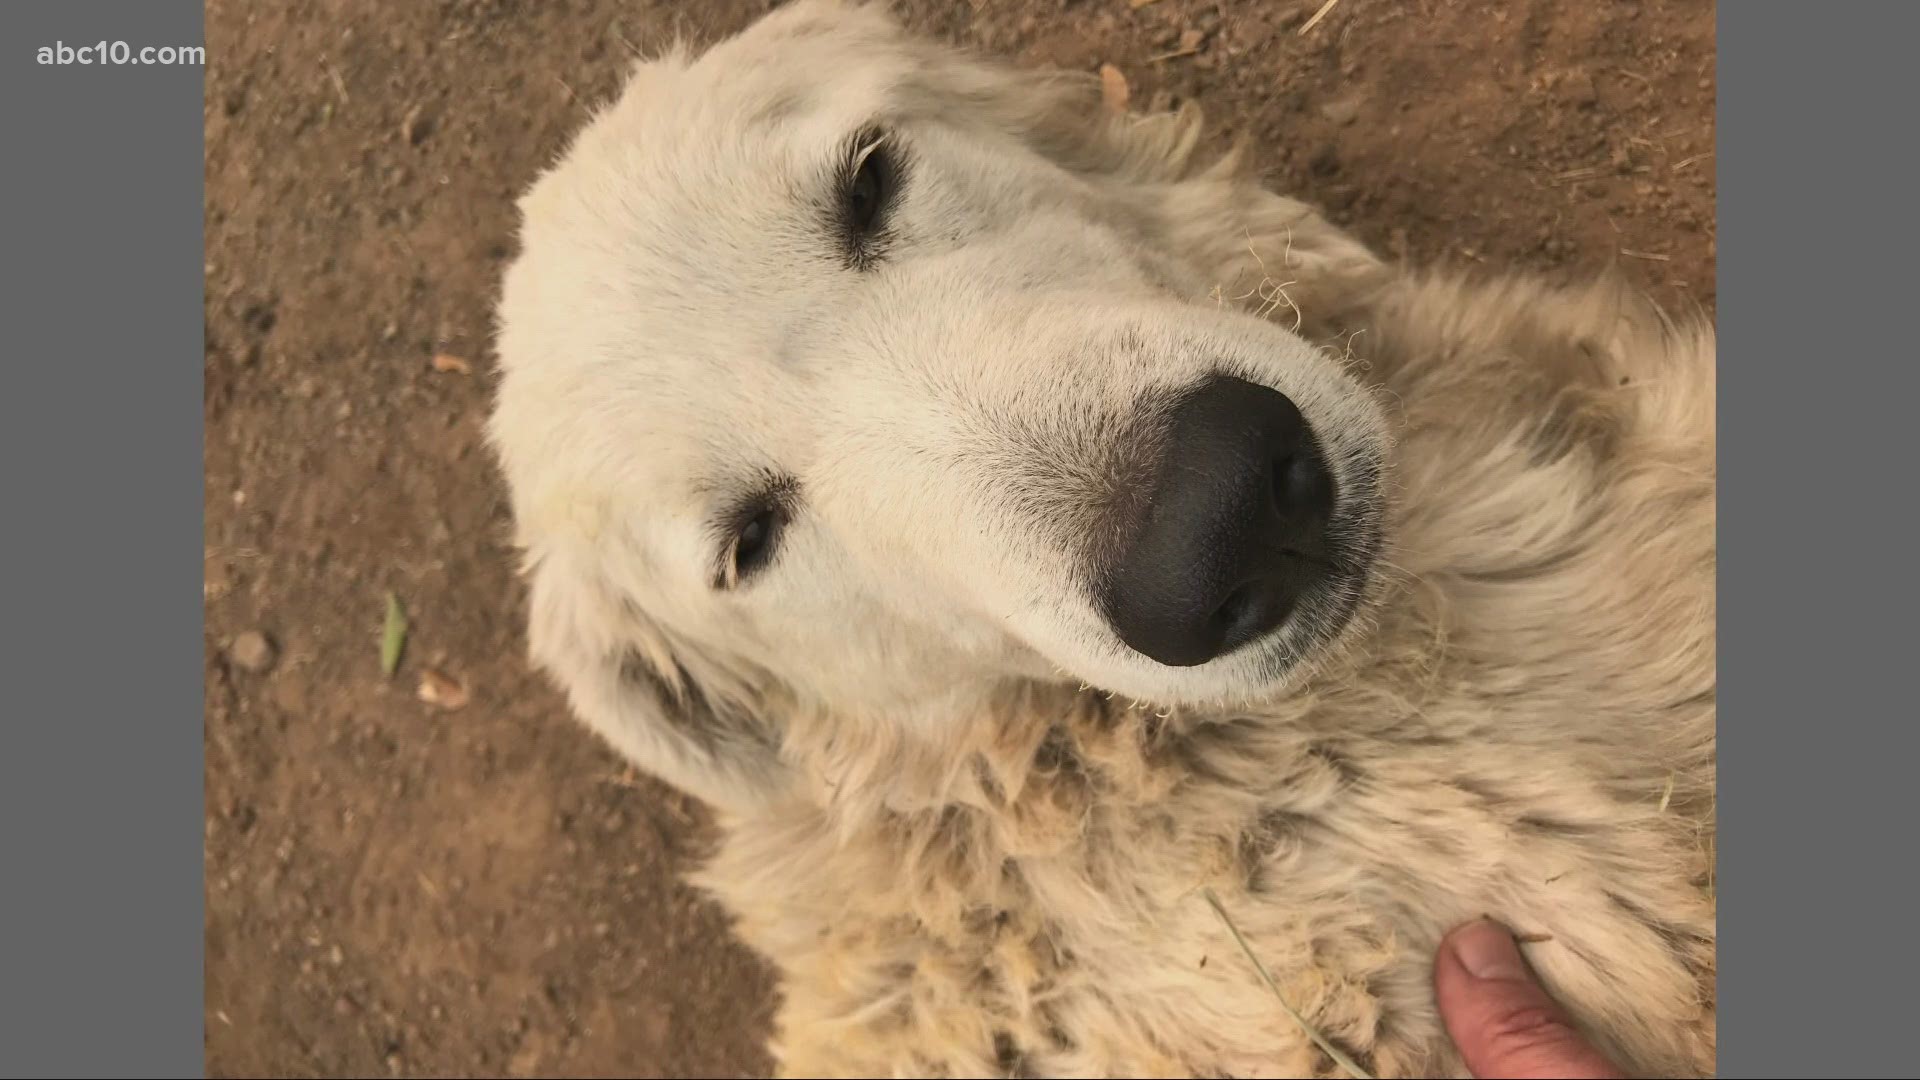 Hero dog who protected goats during Tubbs Fire dies 